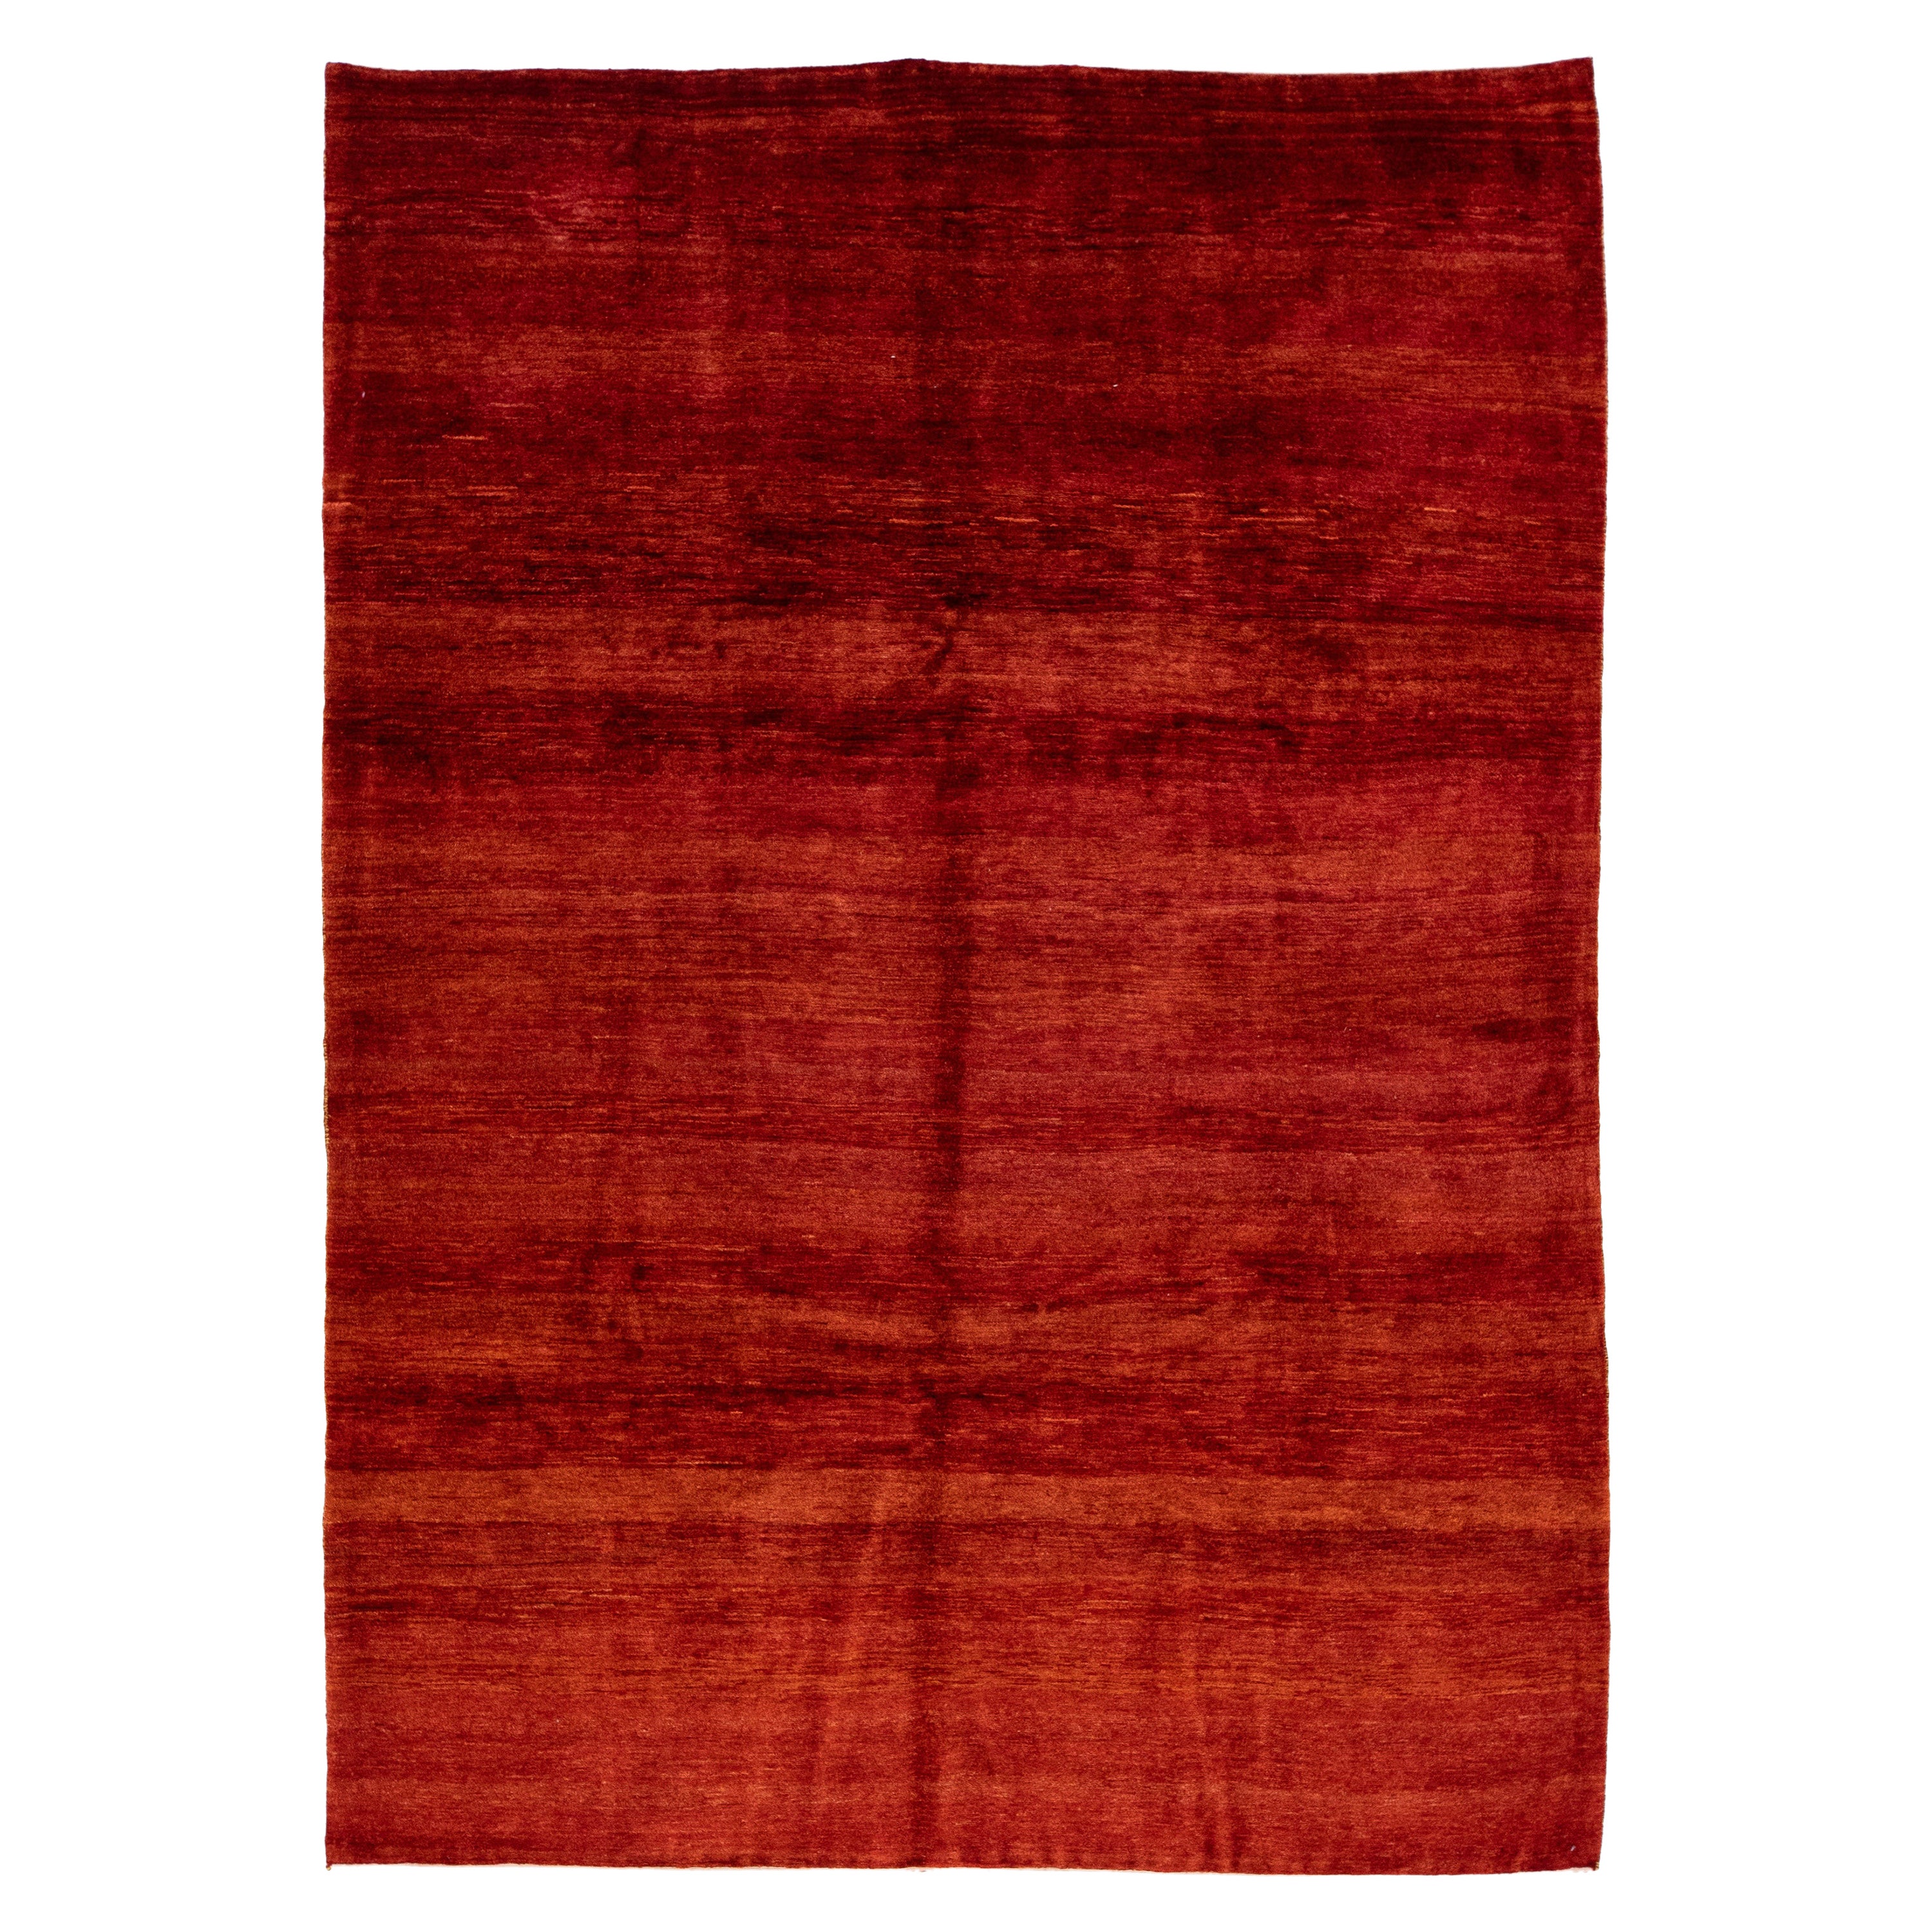  Solid Red Modern Gabbeh Style Handmade Room Size Wool Rug